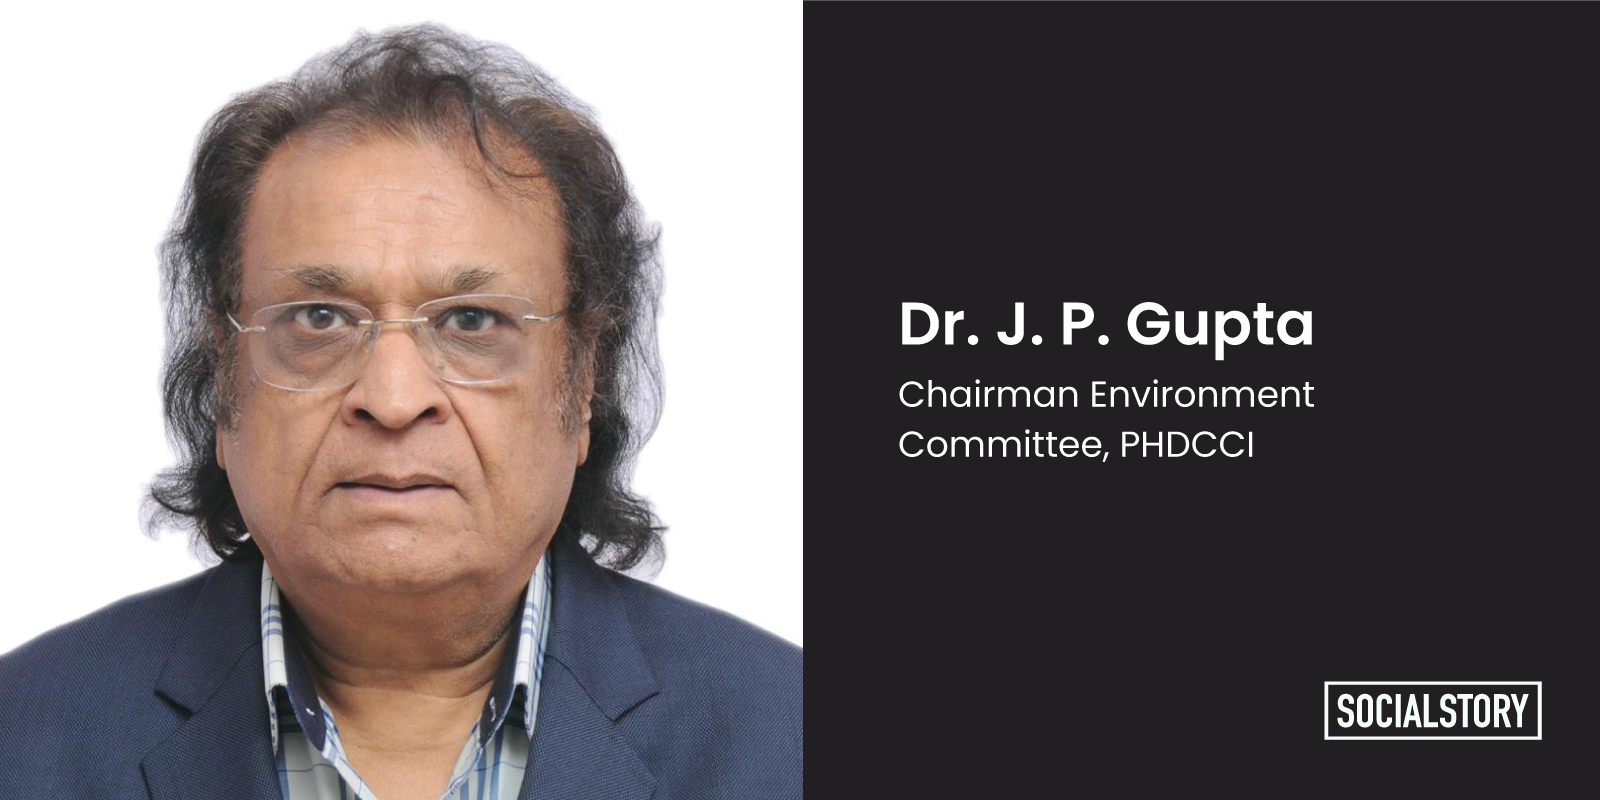 India is best placed to produce cost-effective renewable, hydrogen energy: Scientist Dr JP Gupta